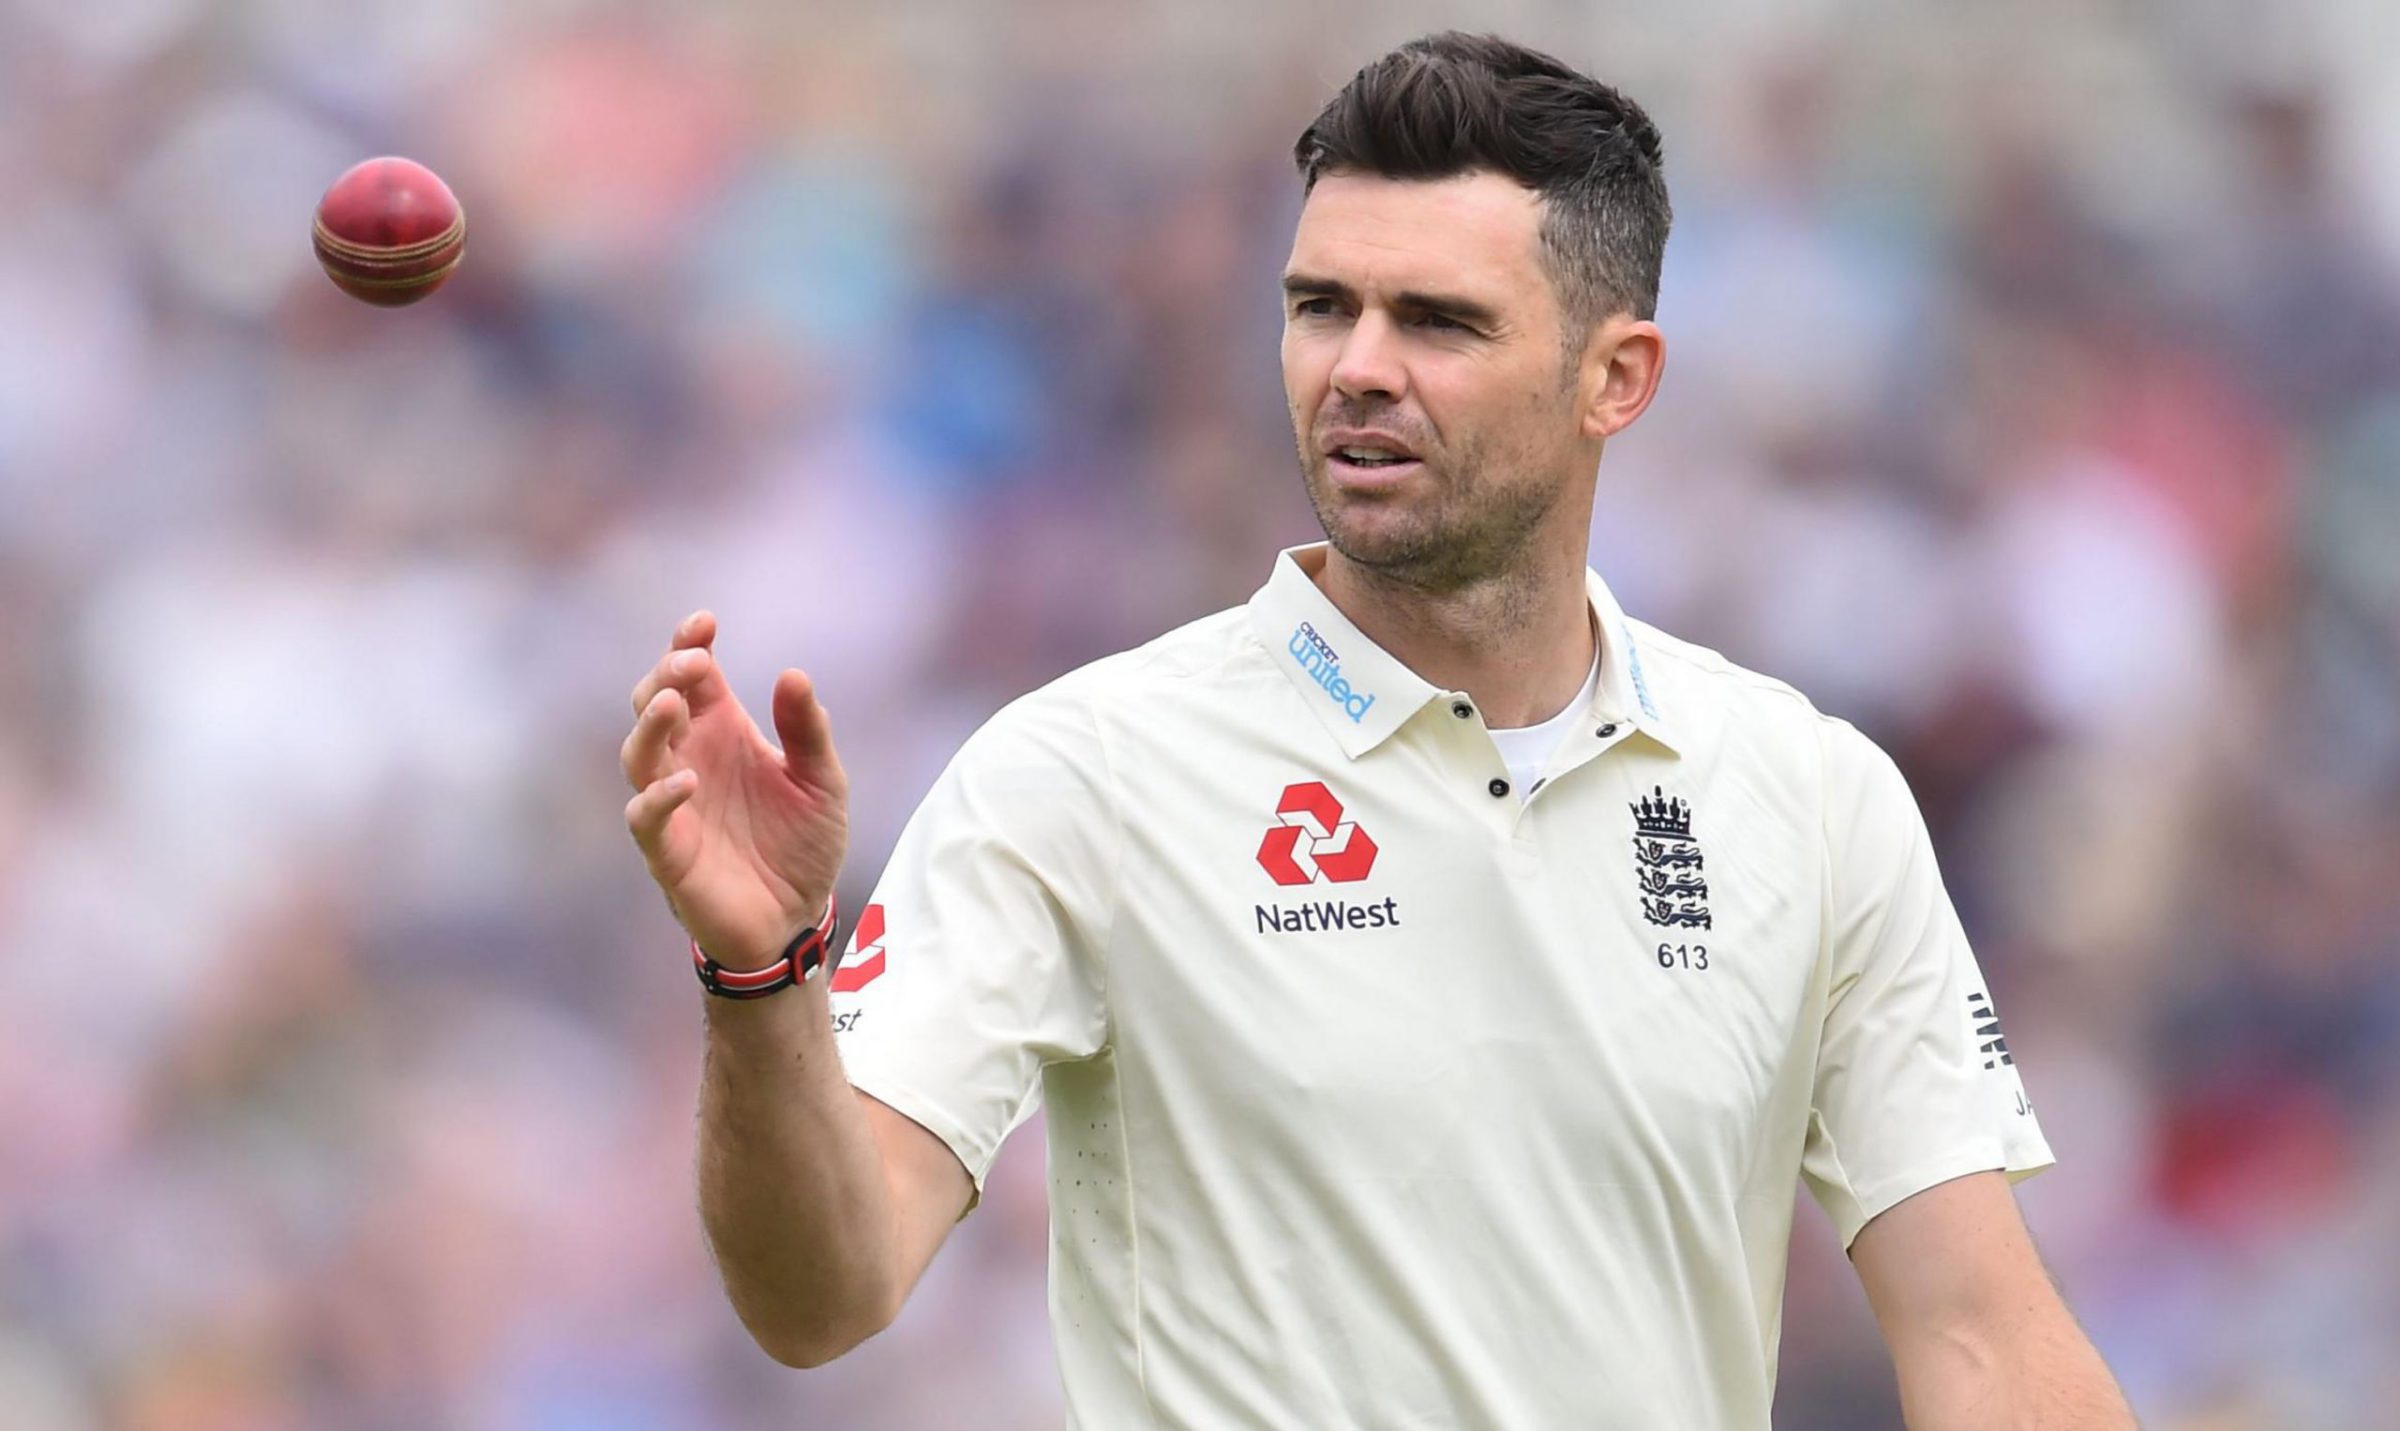 Pat Cummins Is The Leader of Australia's Bowling Attack; Should Be Given A Chance As Test Skipper- Feels James Anderson